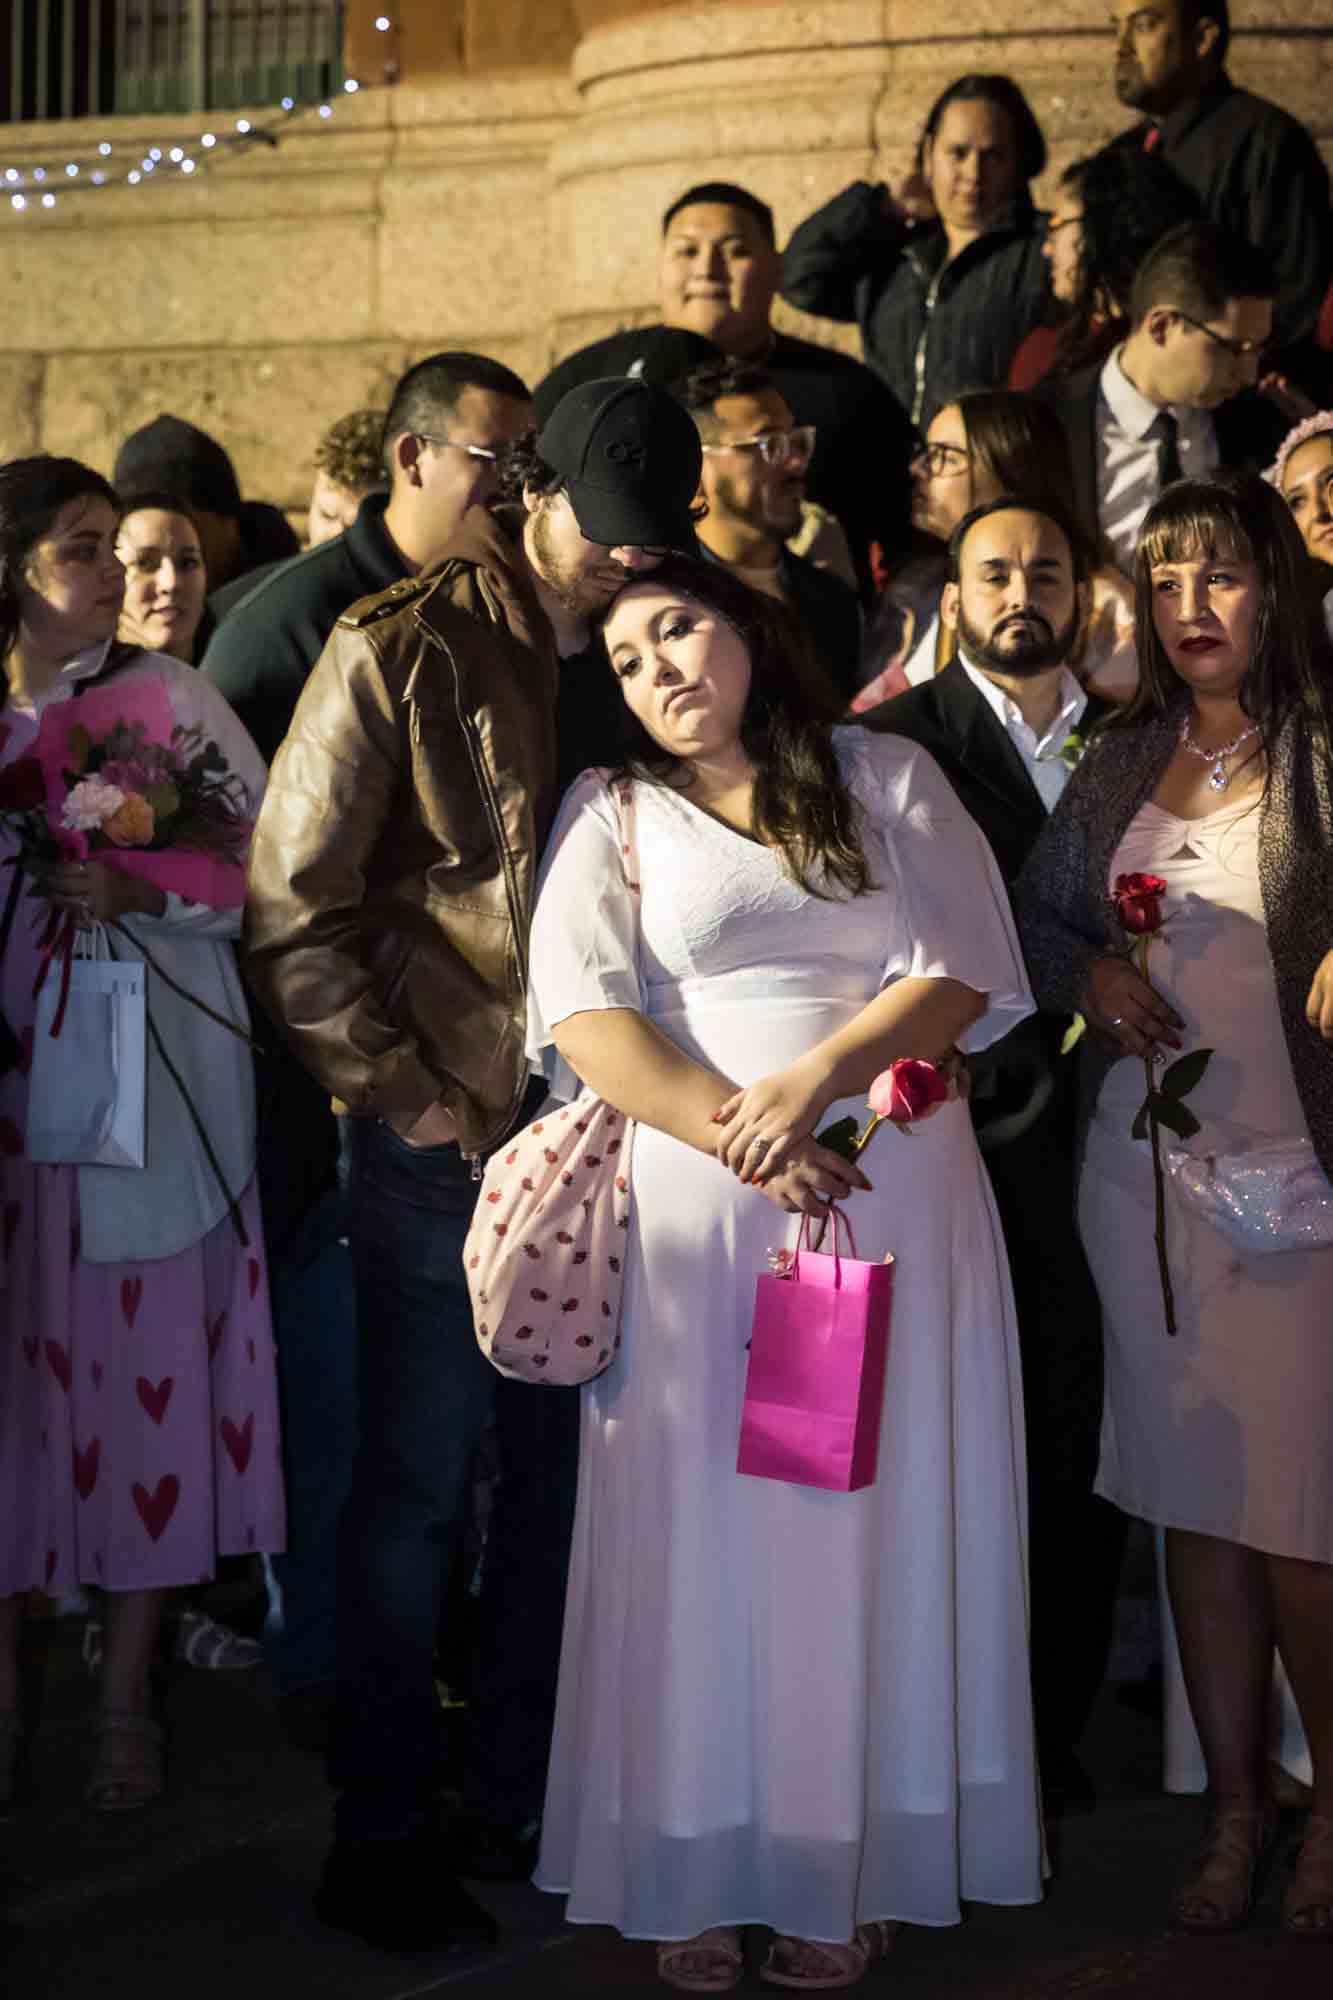 Bride in white dress leaning on man wearing black cap in front of crowd for an article on the Bexar county mass wedding event